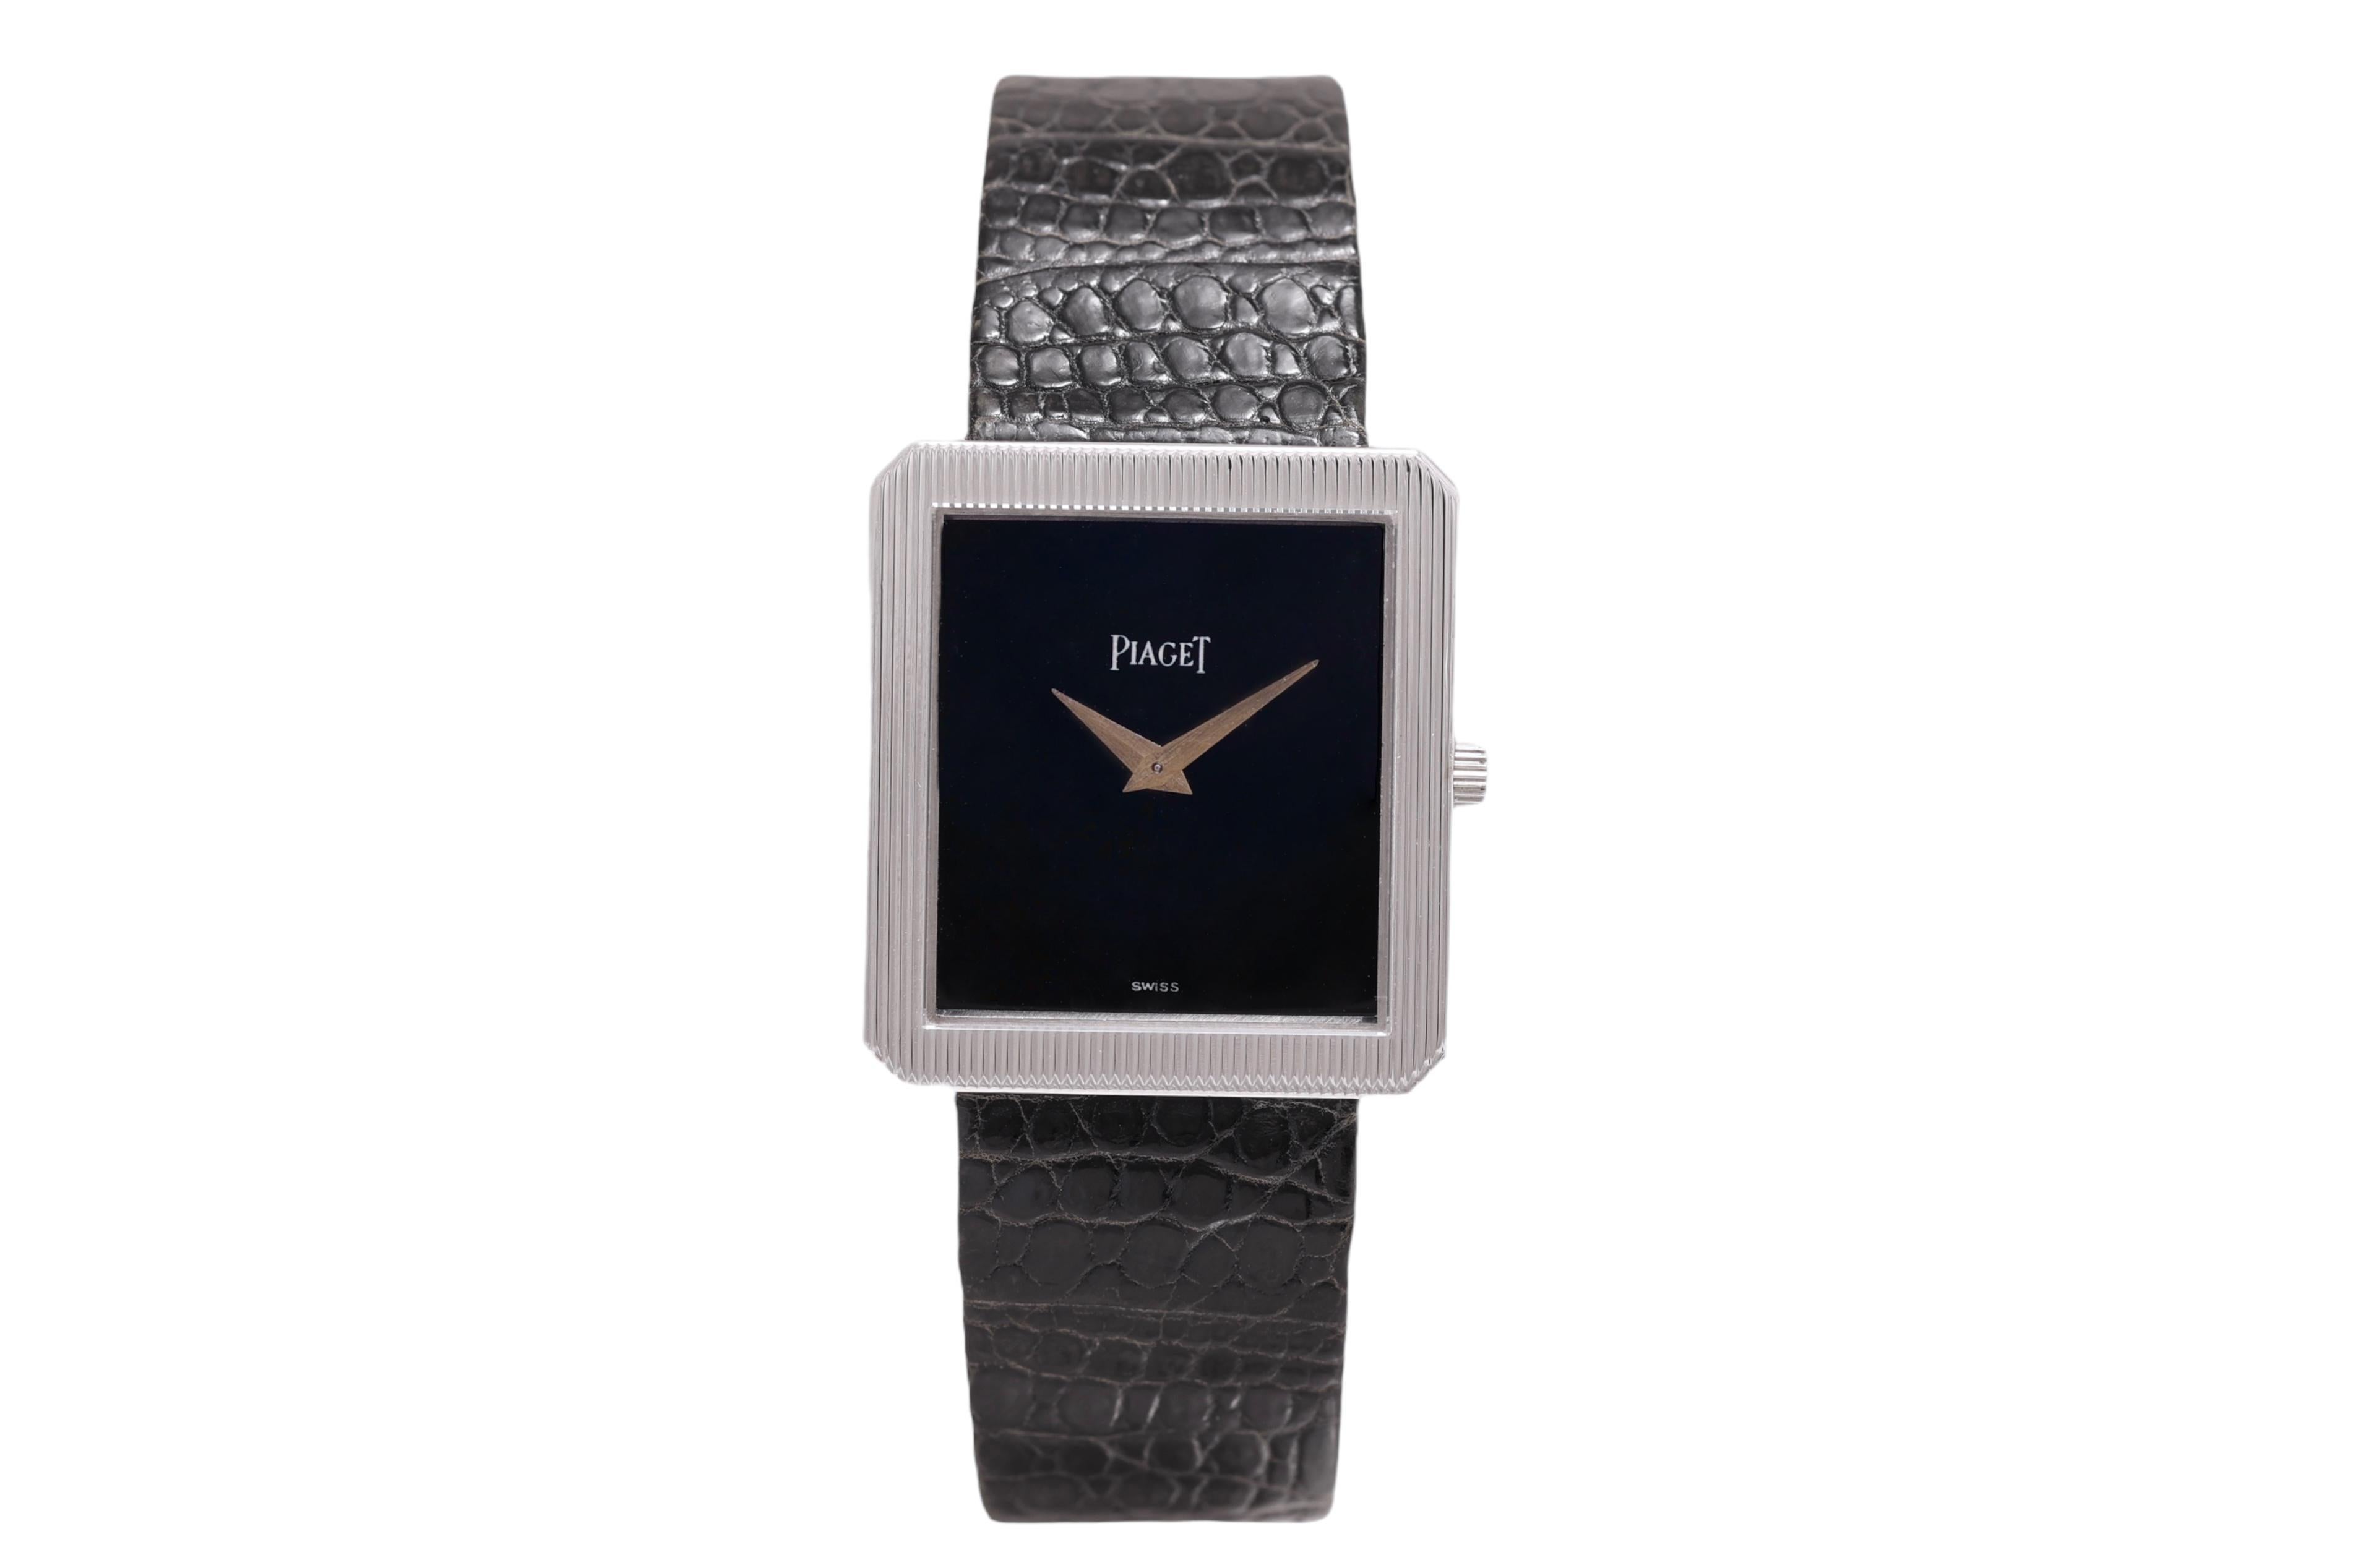 Collectors 18 Kt White Gold Piaget Protocole Wrist Watch, Manual Winding

Movement : Mechanical Manual Winding, Caliber 9P

Dial : Black

Case : Tapistry Motif 18 Kt Solid White Gold, 25mm x 27.3 mm

Strap : Piaget Leather Strap damged back,we will